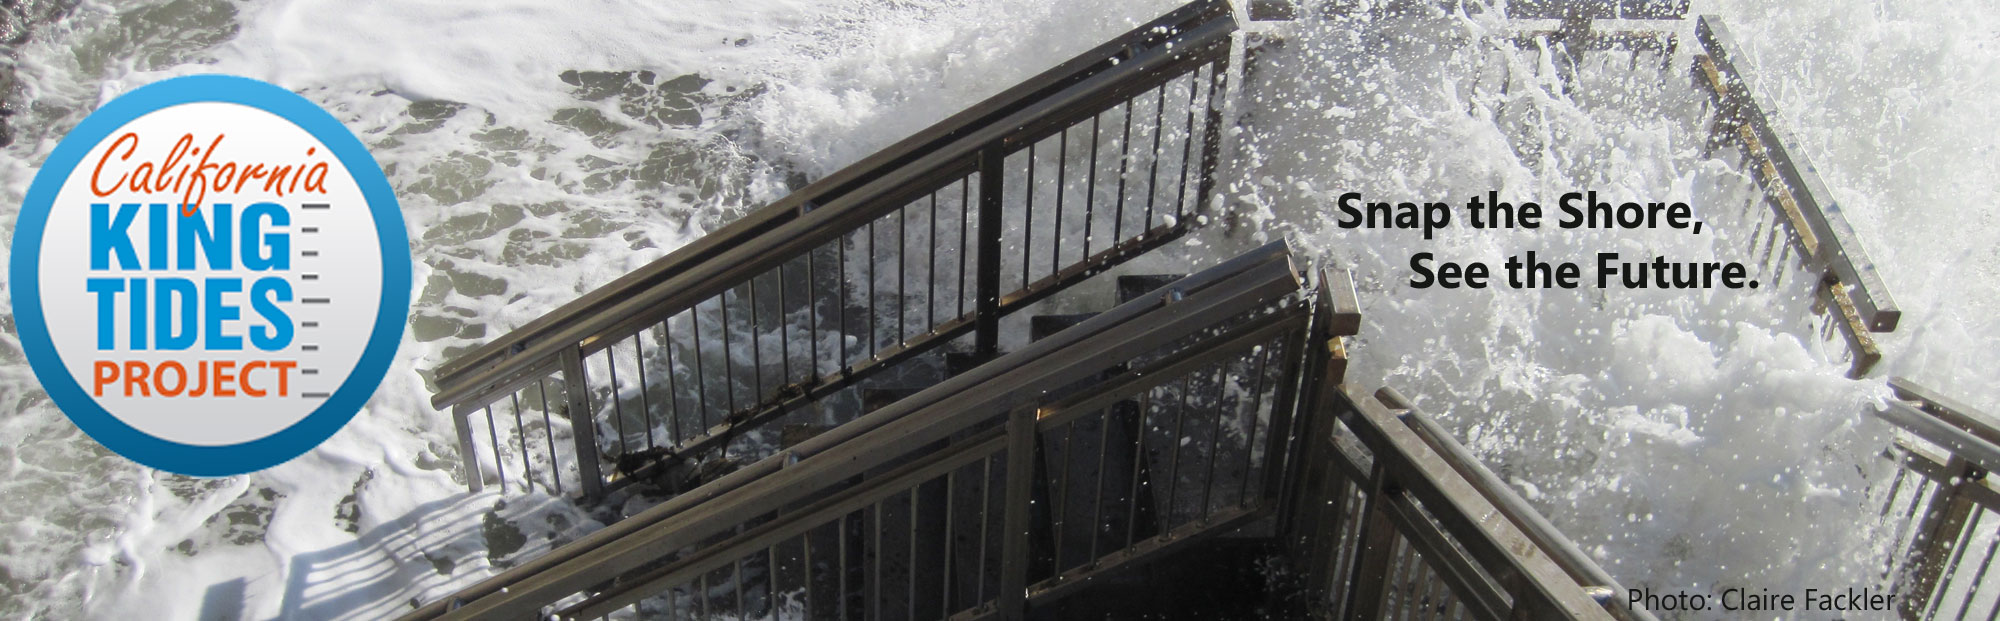 California King Tides Project. Snap the Shore, See the Future. Waves splash over beach access stairs